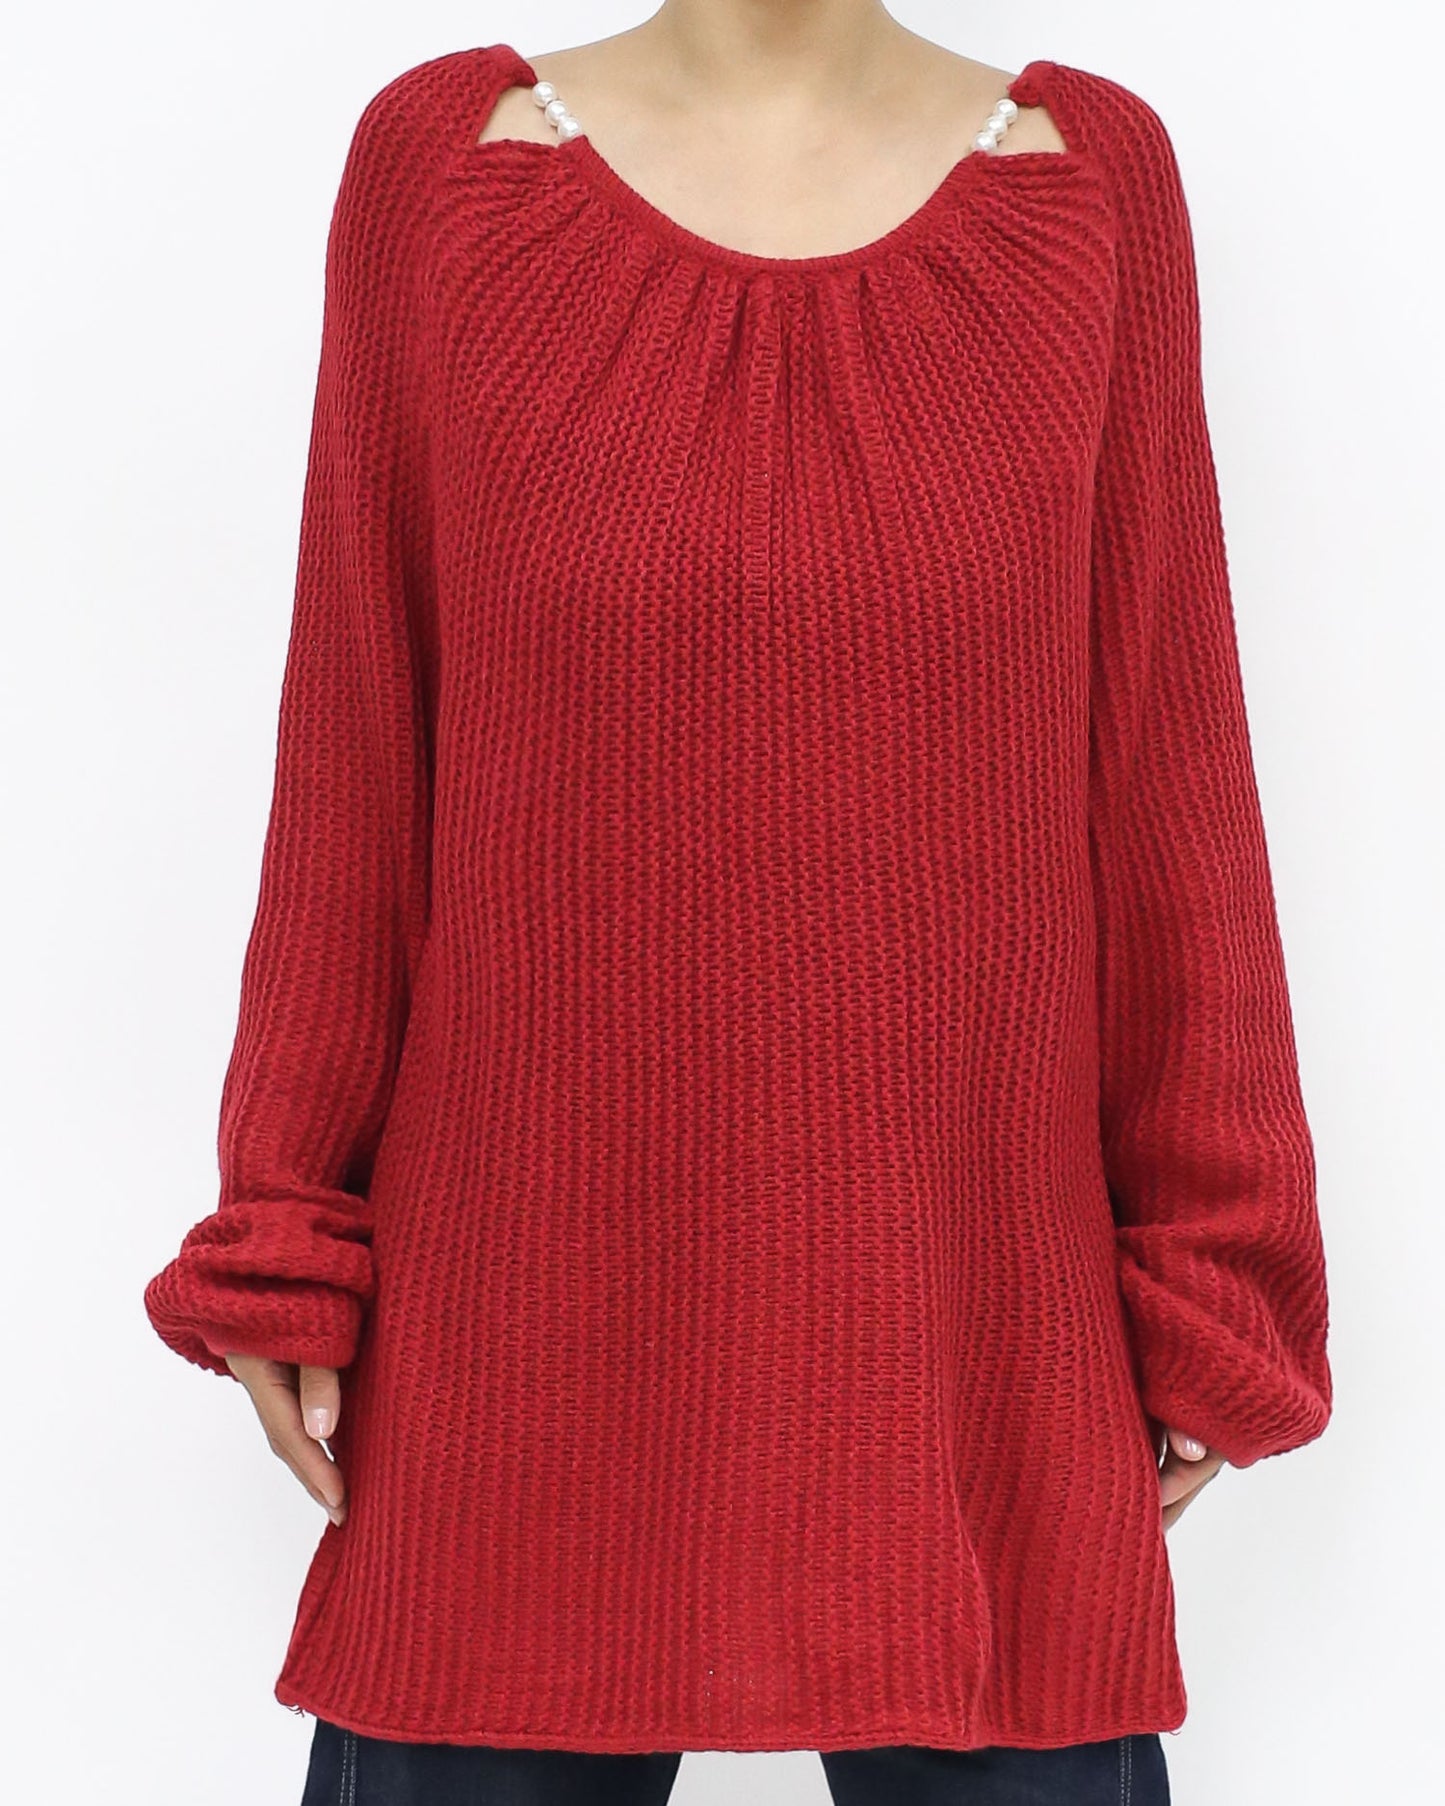 red w/ pearls chains cutout knitted top